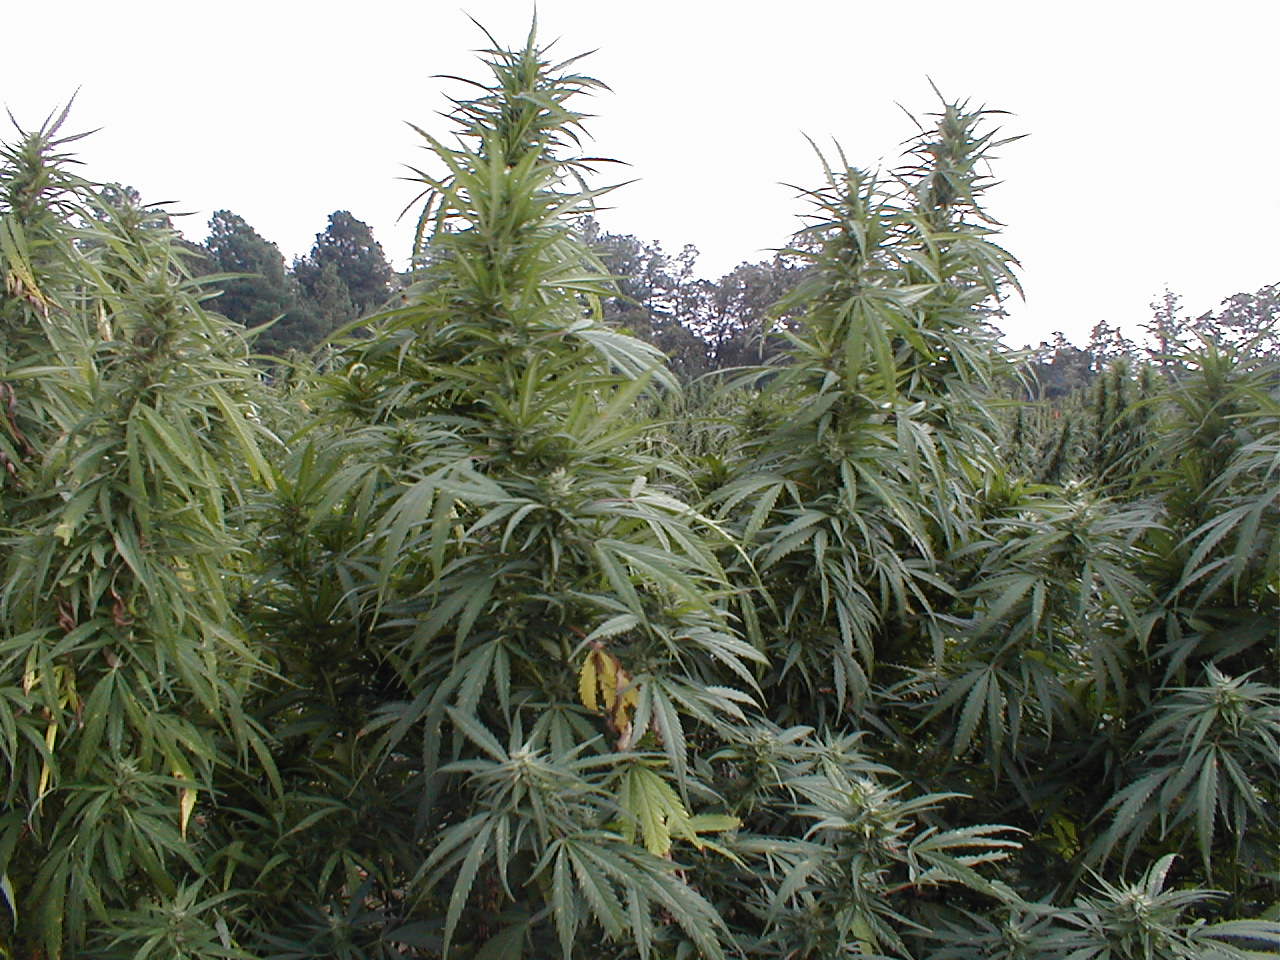 Image: Marijuana farmers are destroying natural ecosystems as quest for profits outweighs “green” agricultural practices